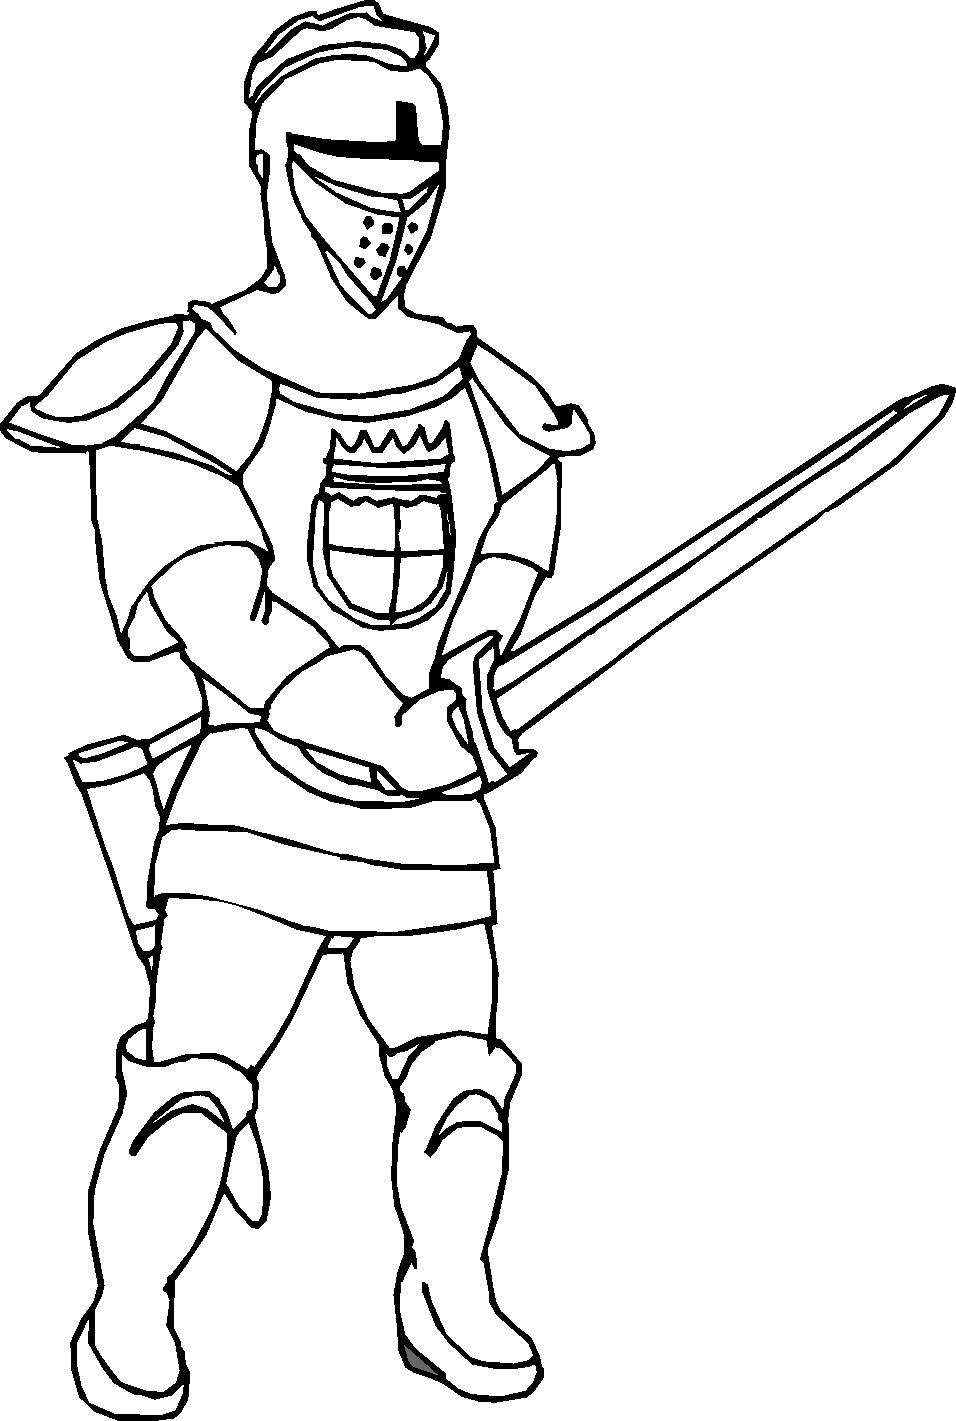 knight coloring page knight coloring pages getcoloringpagescom knight page coloring 